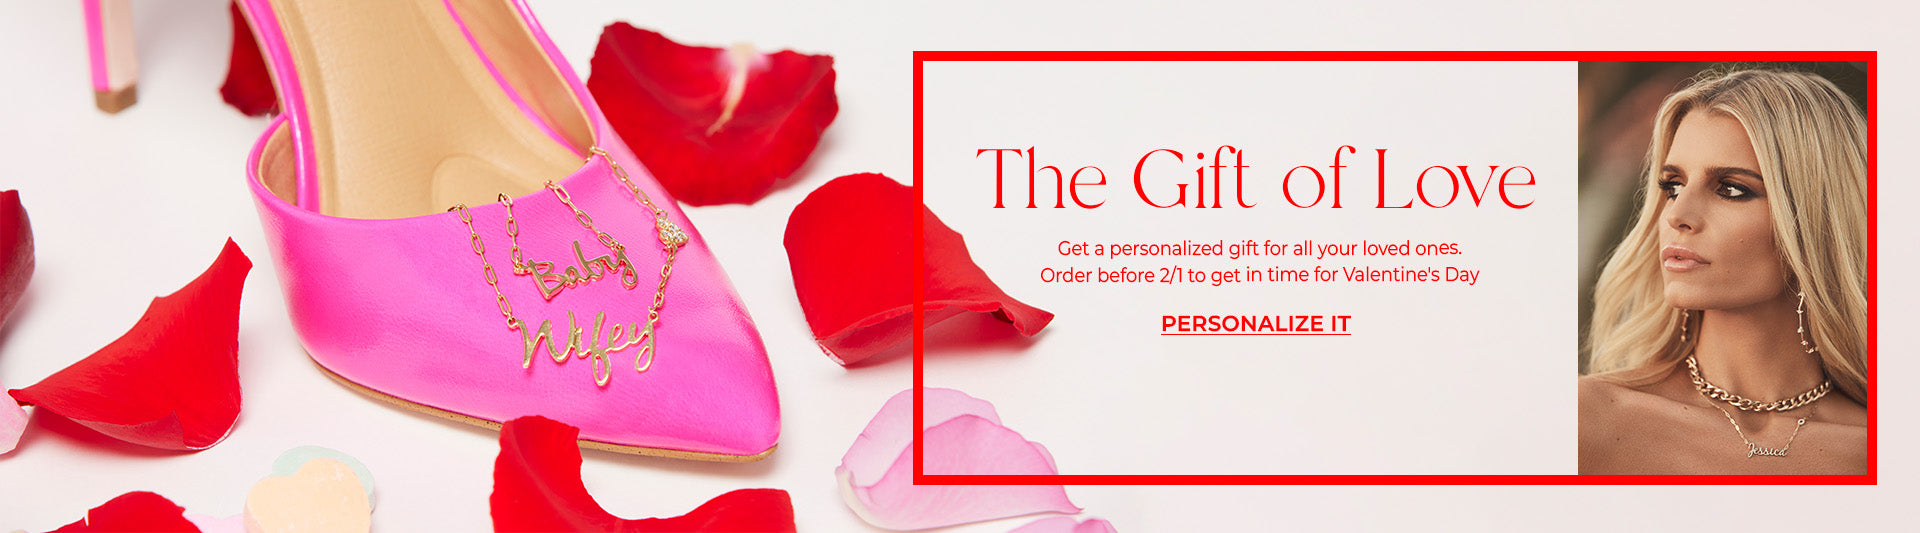 The Gift of Love. Get a personalized gift for all of your loved ones. Order before 2/1 to get in time for Valentine's Day. Personalize it now